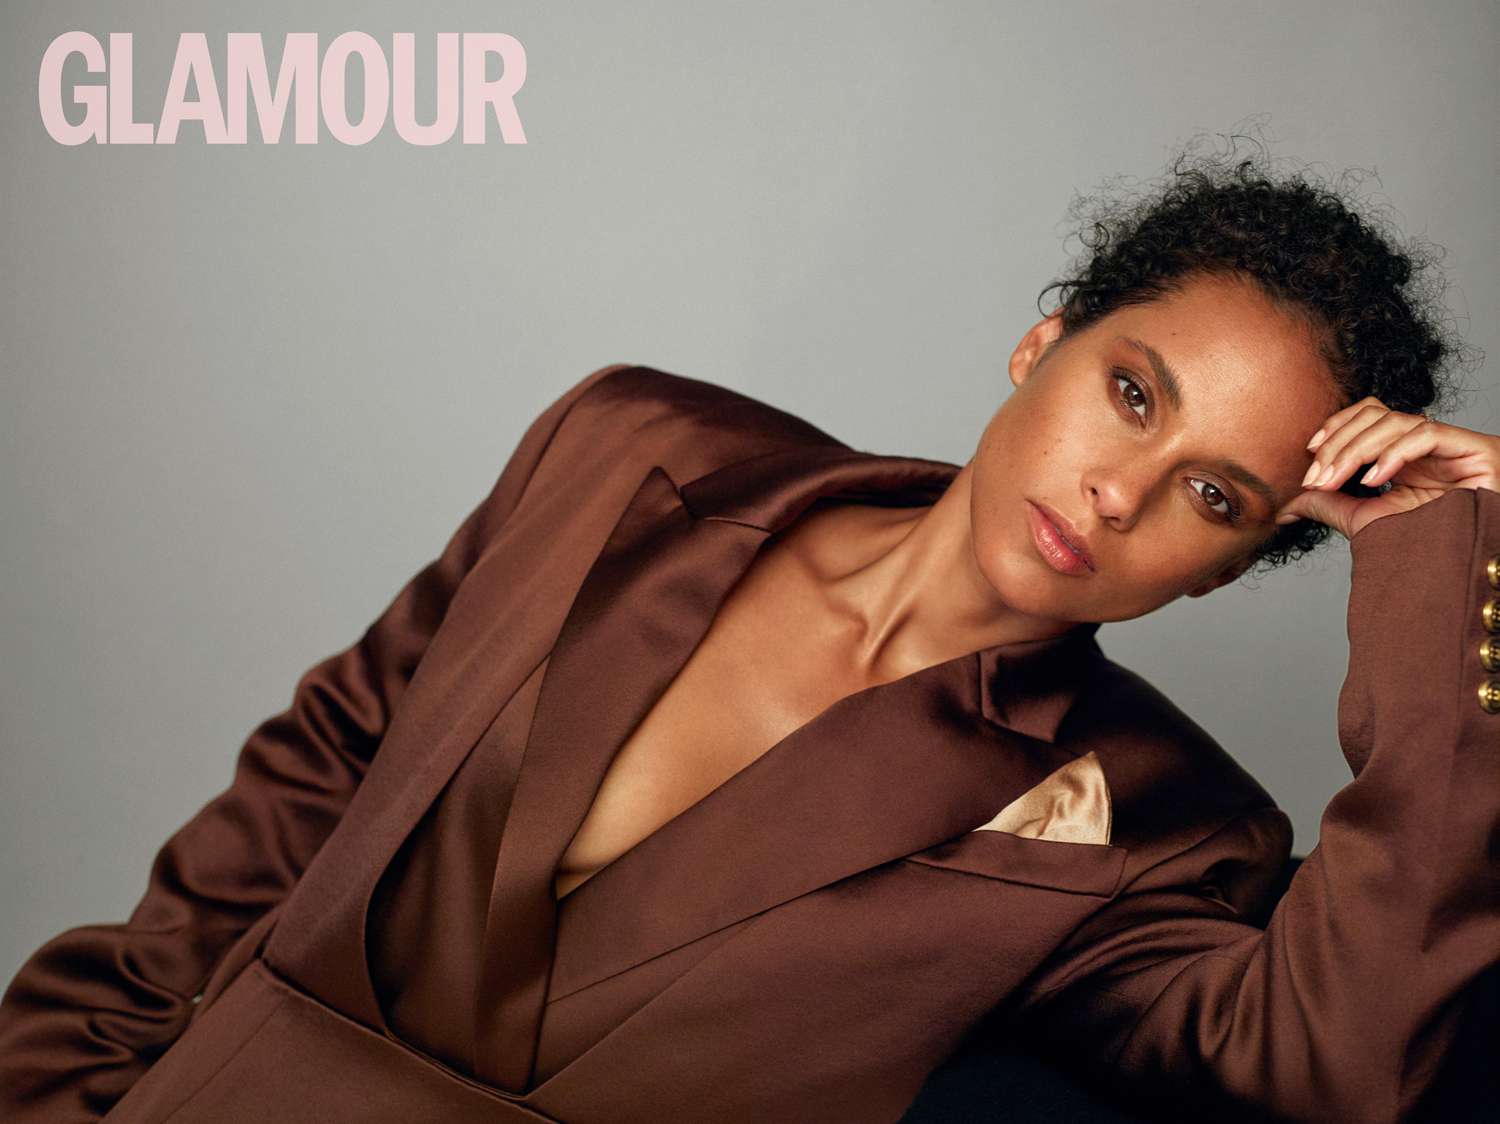 Alicia Keys as the cover star of GLAMOUR UK's Autumn/Winter 20/21 Magazine